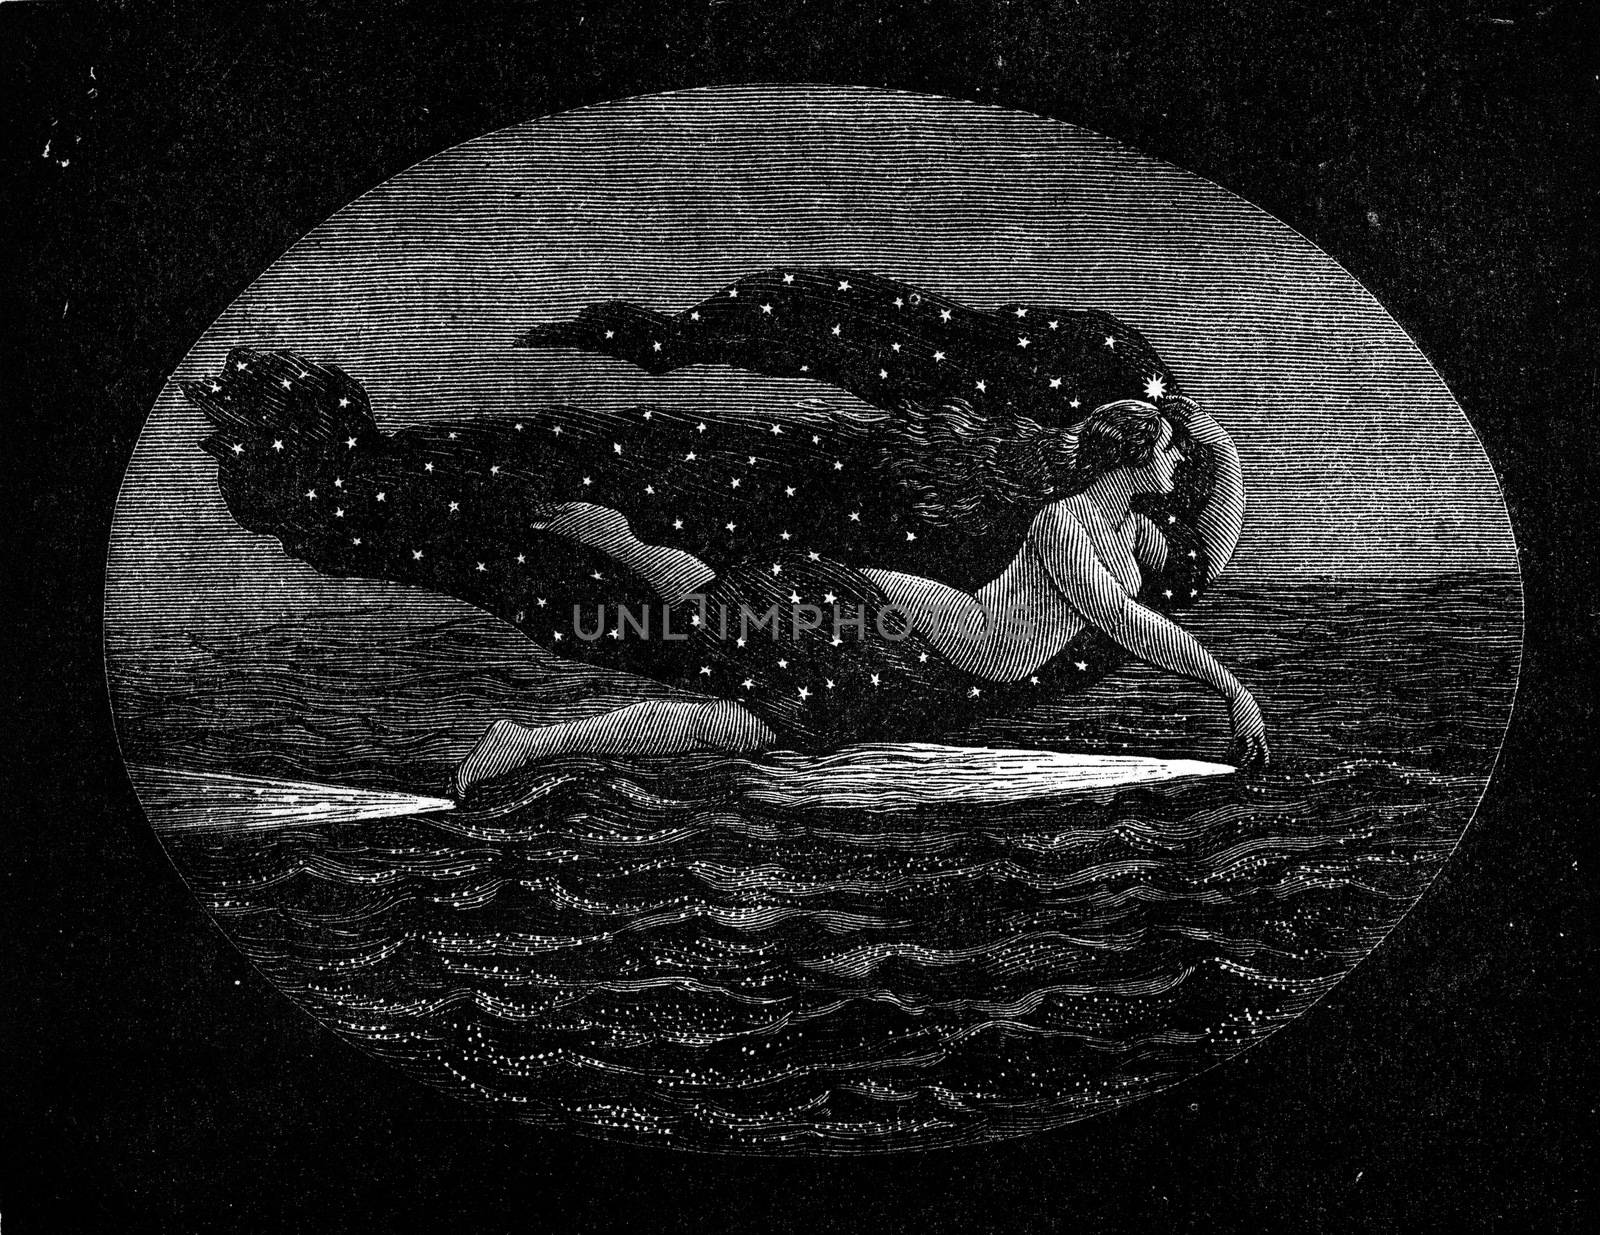 It is believed see a Naiad drag on the airwaves and bring forth the phosphorescence, vintage engraved illustration. Earth before man – 1886.
